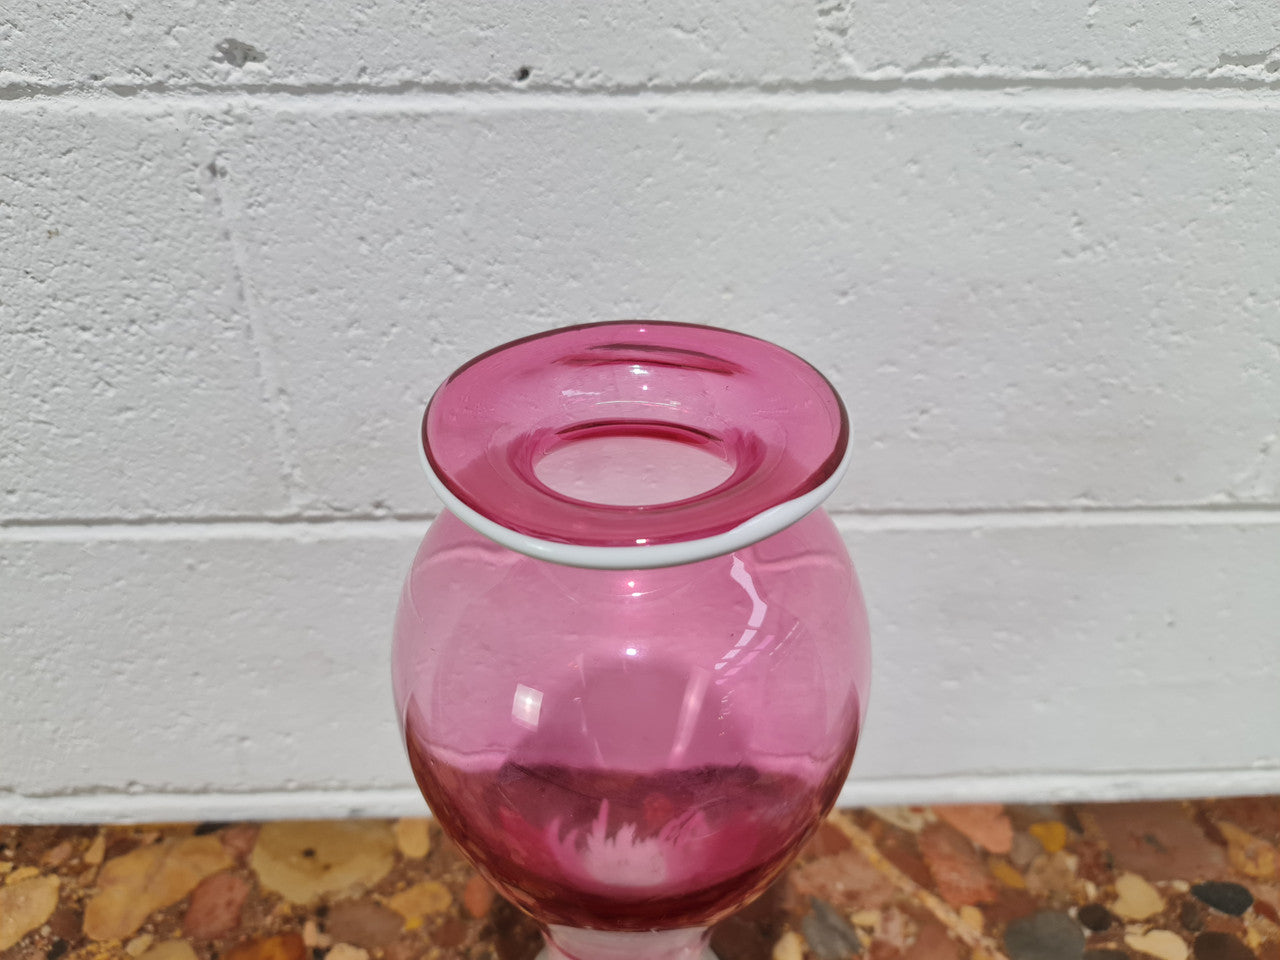 Large Vintage "Murano" pink and white vase. In good condition with no chips or cracks.